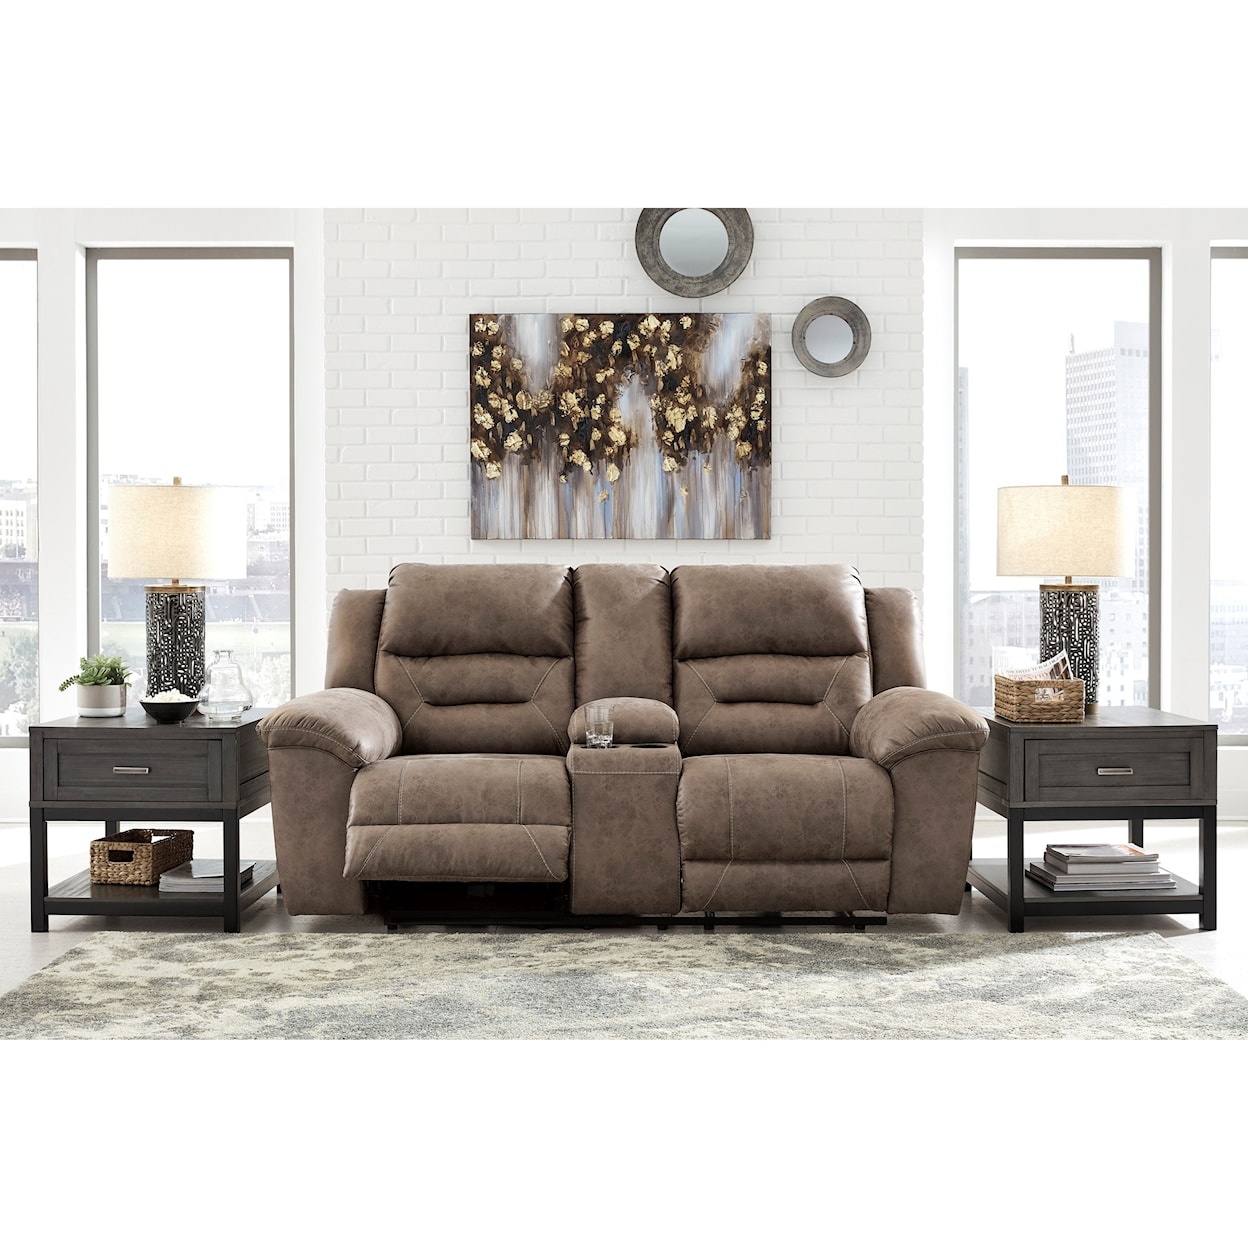 Benchcraft Stoneland Double Recl Power Loveseat w/ Console